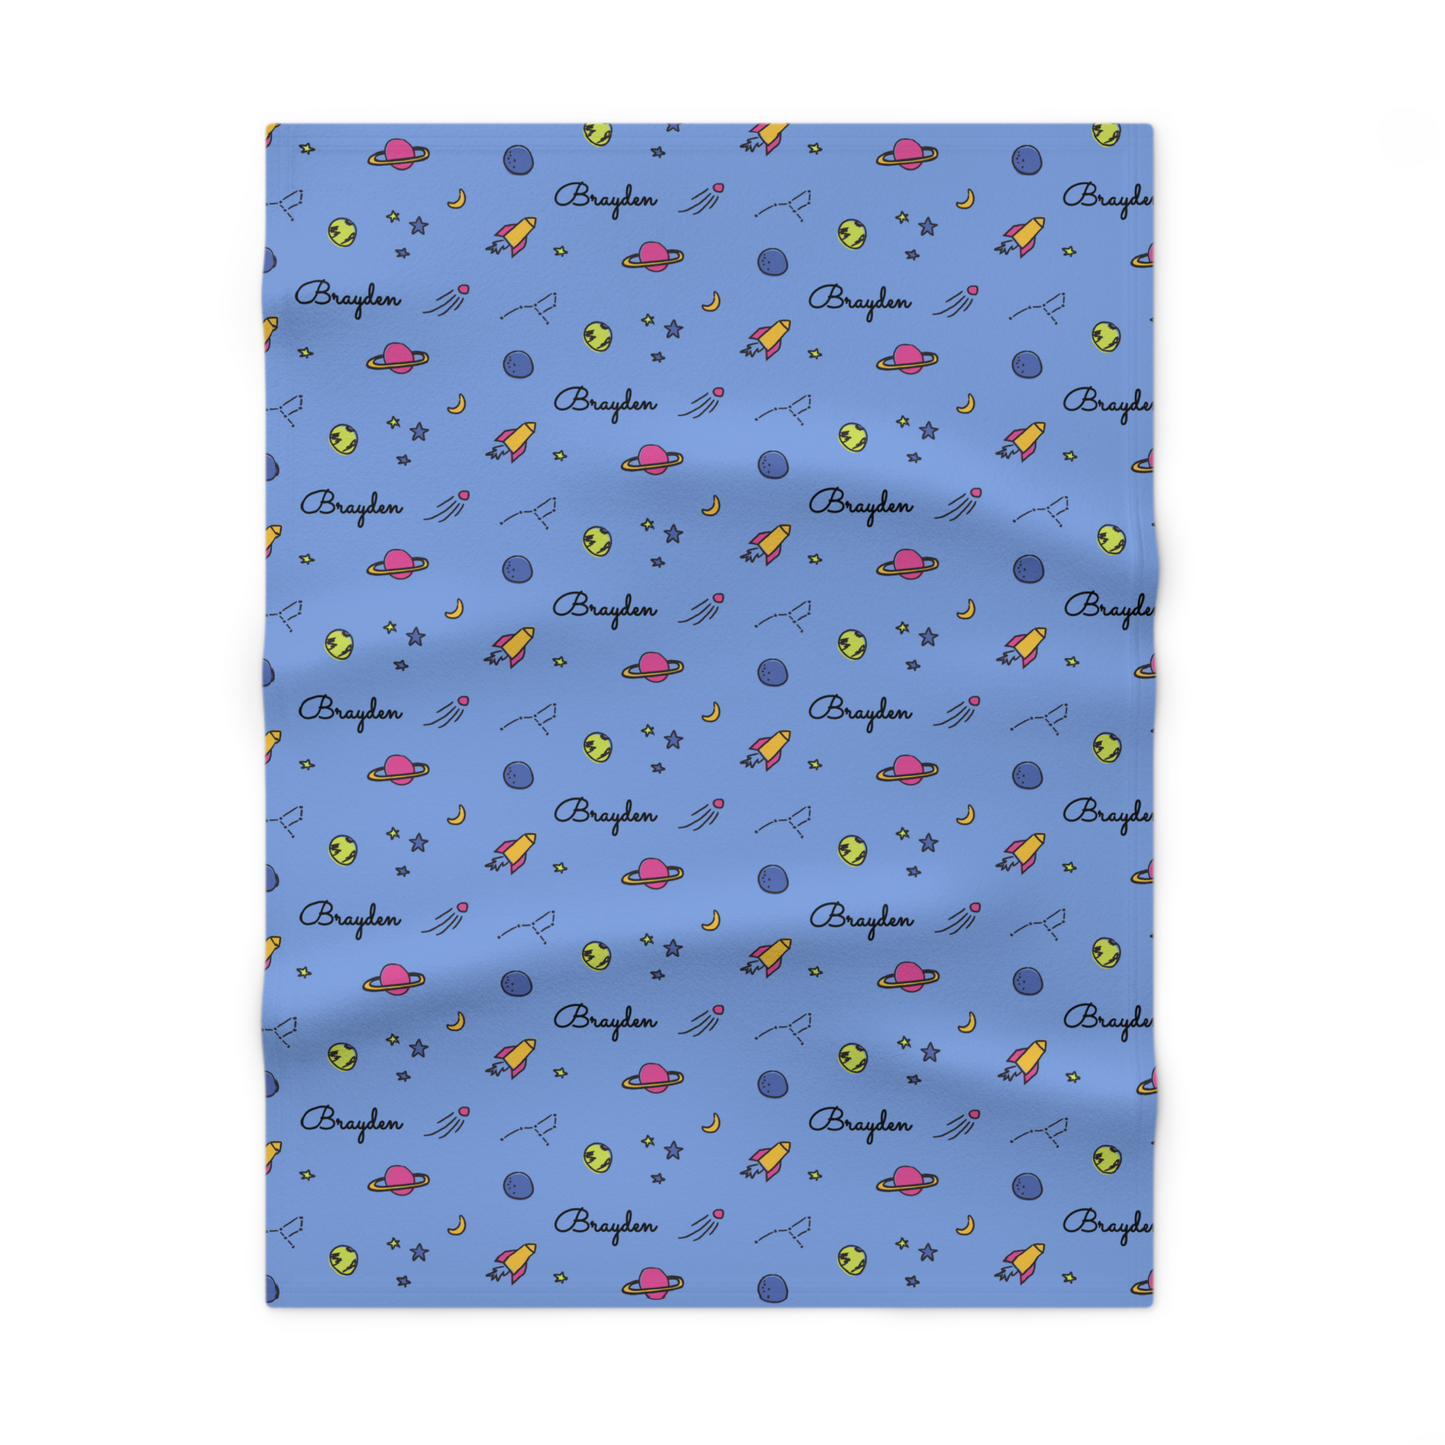 Fleece personalized baby blanket in space, rocket and stars pattern laid flat